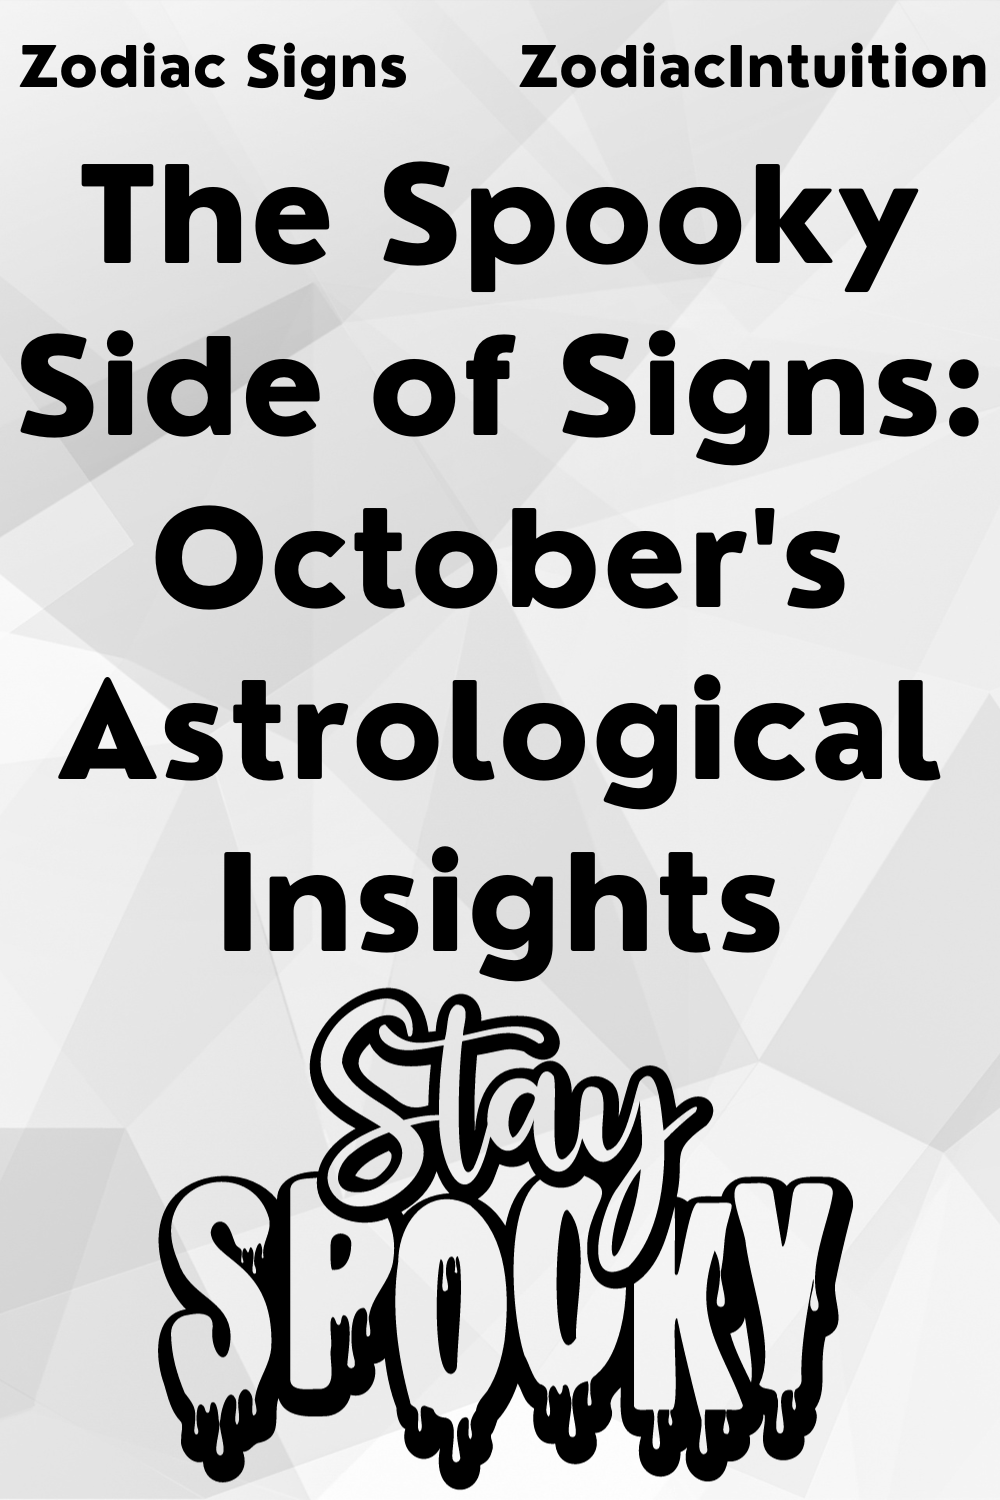 The Spooky Side of Signs: October's Astrological Insights